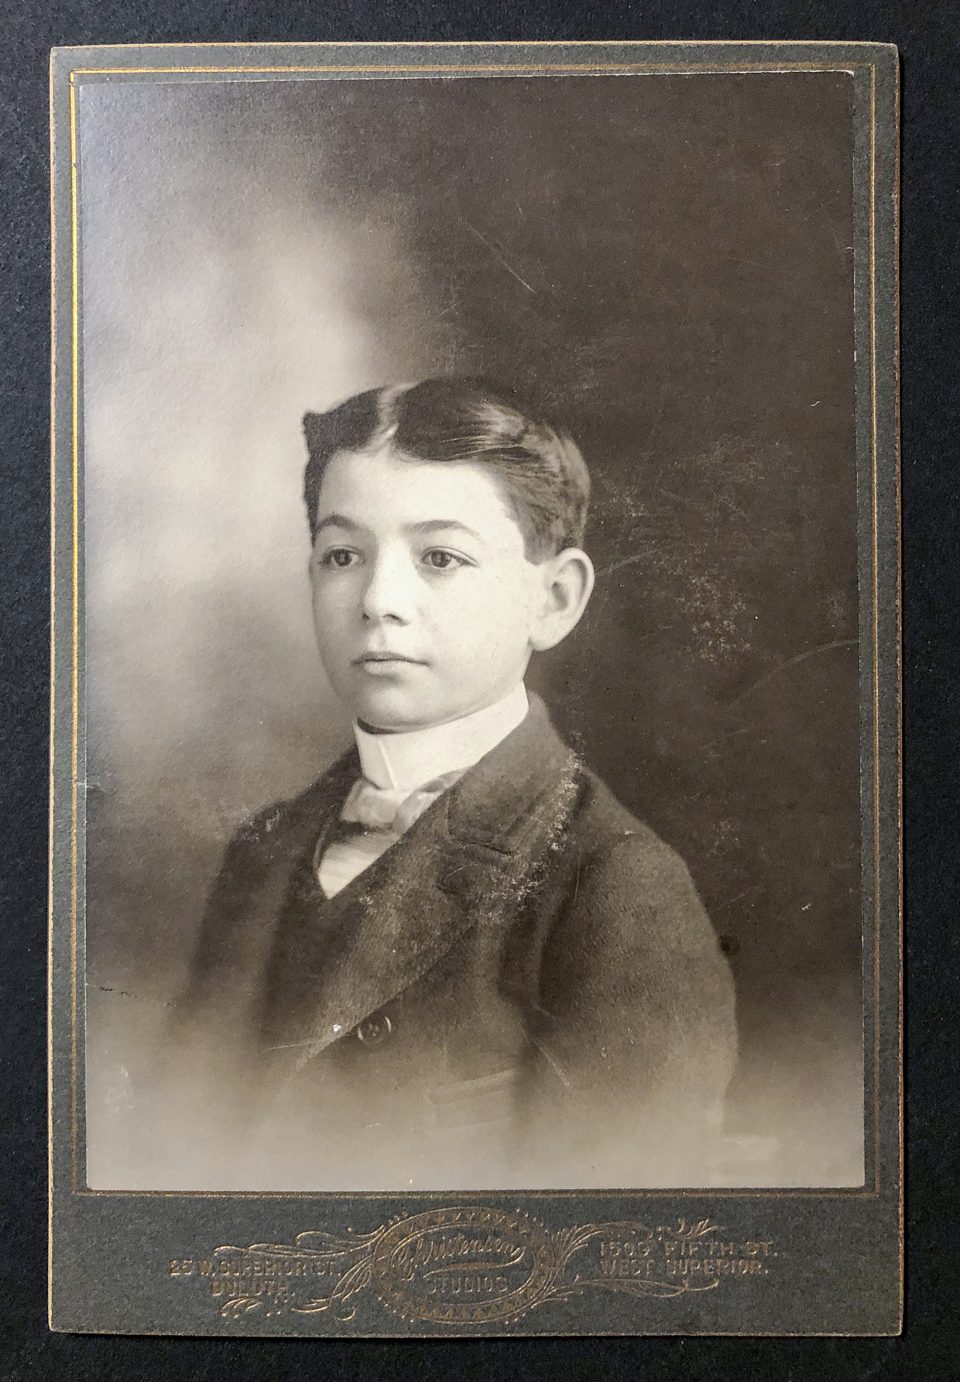 Head and shoulders portrait of a young boy with an overcoat and spiffy bowtie, shot by the Christensen Studios in either Duluth or West Superior, Wisconsin.